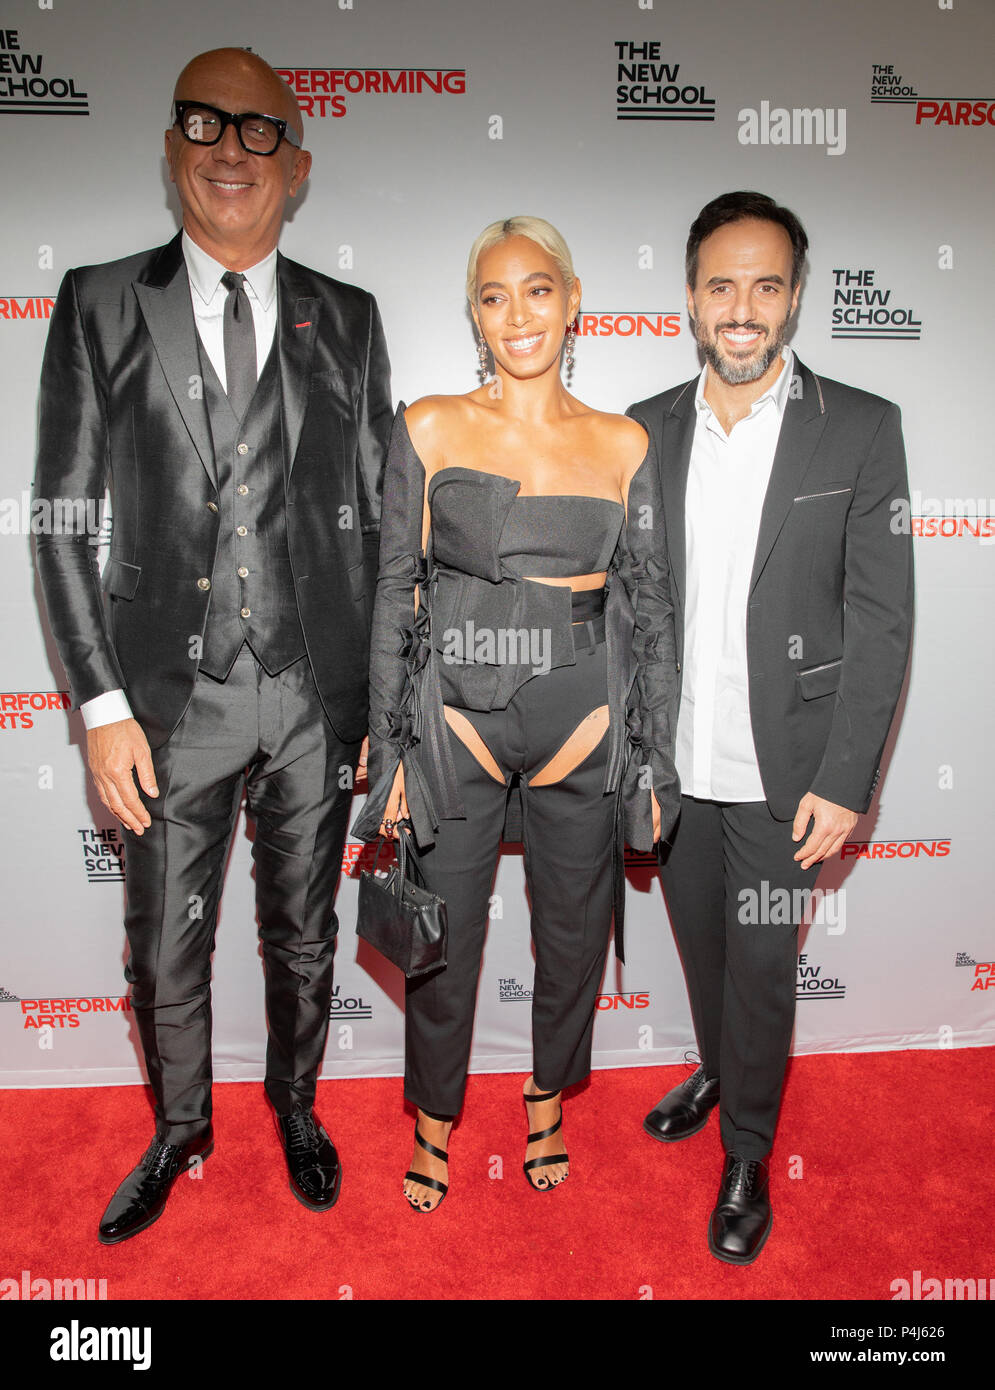 The New School 70th Annual Parsons Benefit Honoring Solange Knowles , Gucci  CEO Marco Bizzari, and Jose Neves, the founder of online retailer Farfetch  Featuring: Gucci CEO Marco Bizzarri, Cleo Wade Where